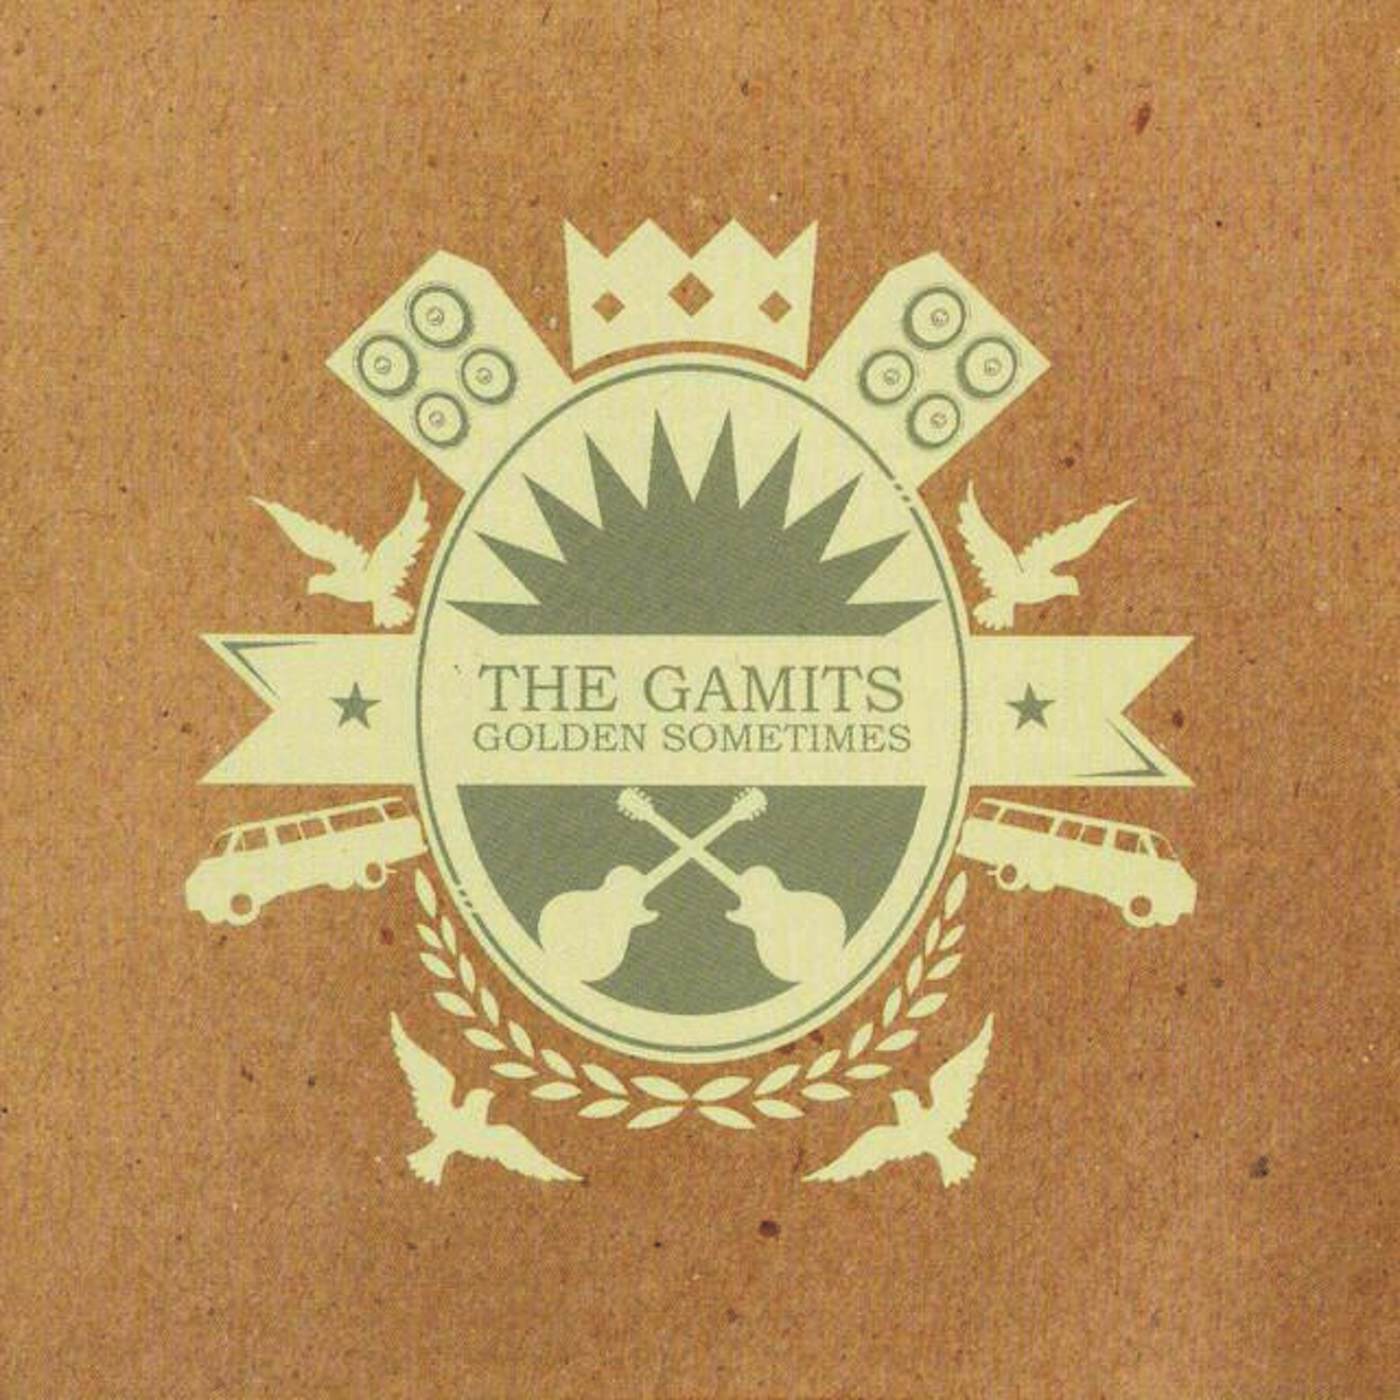 The Gamits